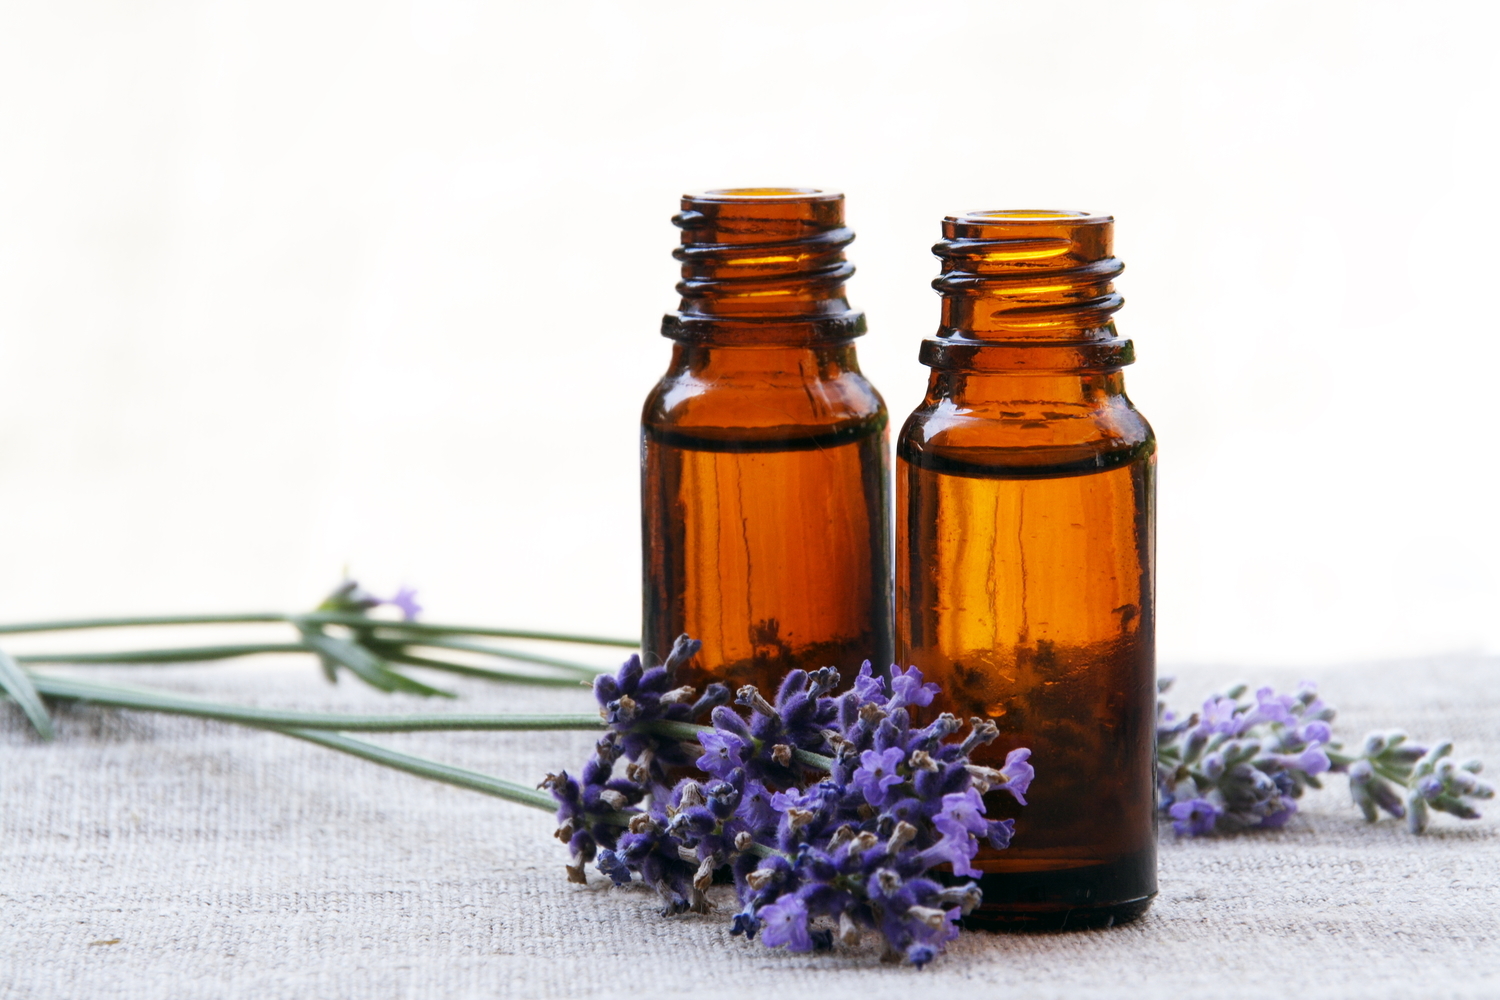 Aromatherapy Aroma Oil in Glass Bottles with Lavender